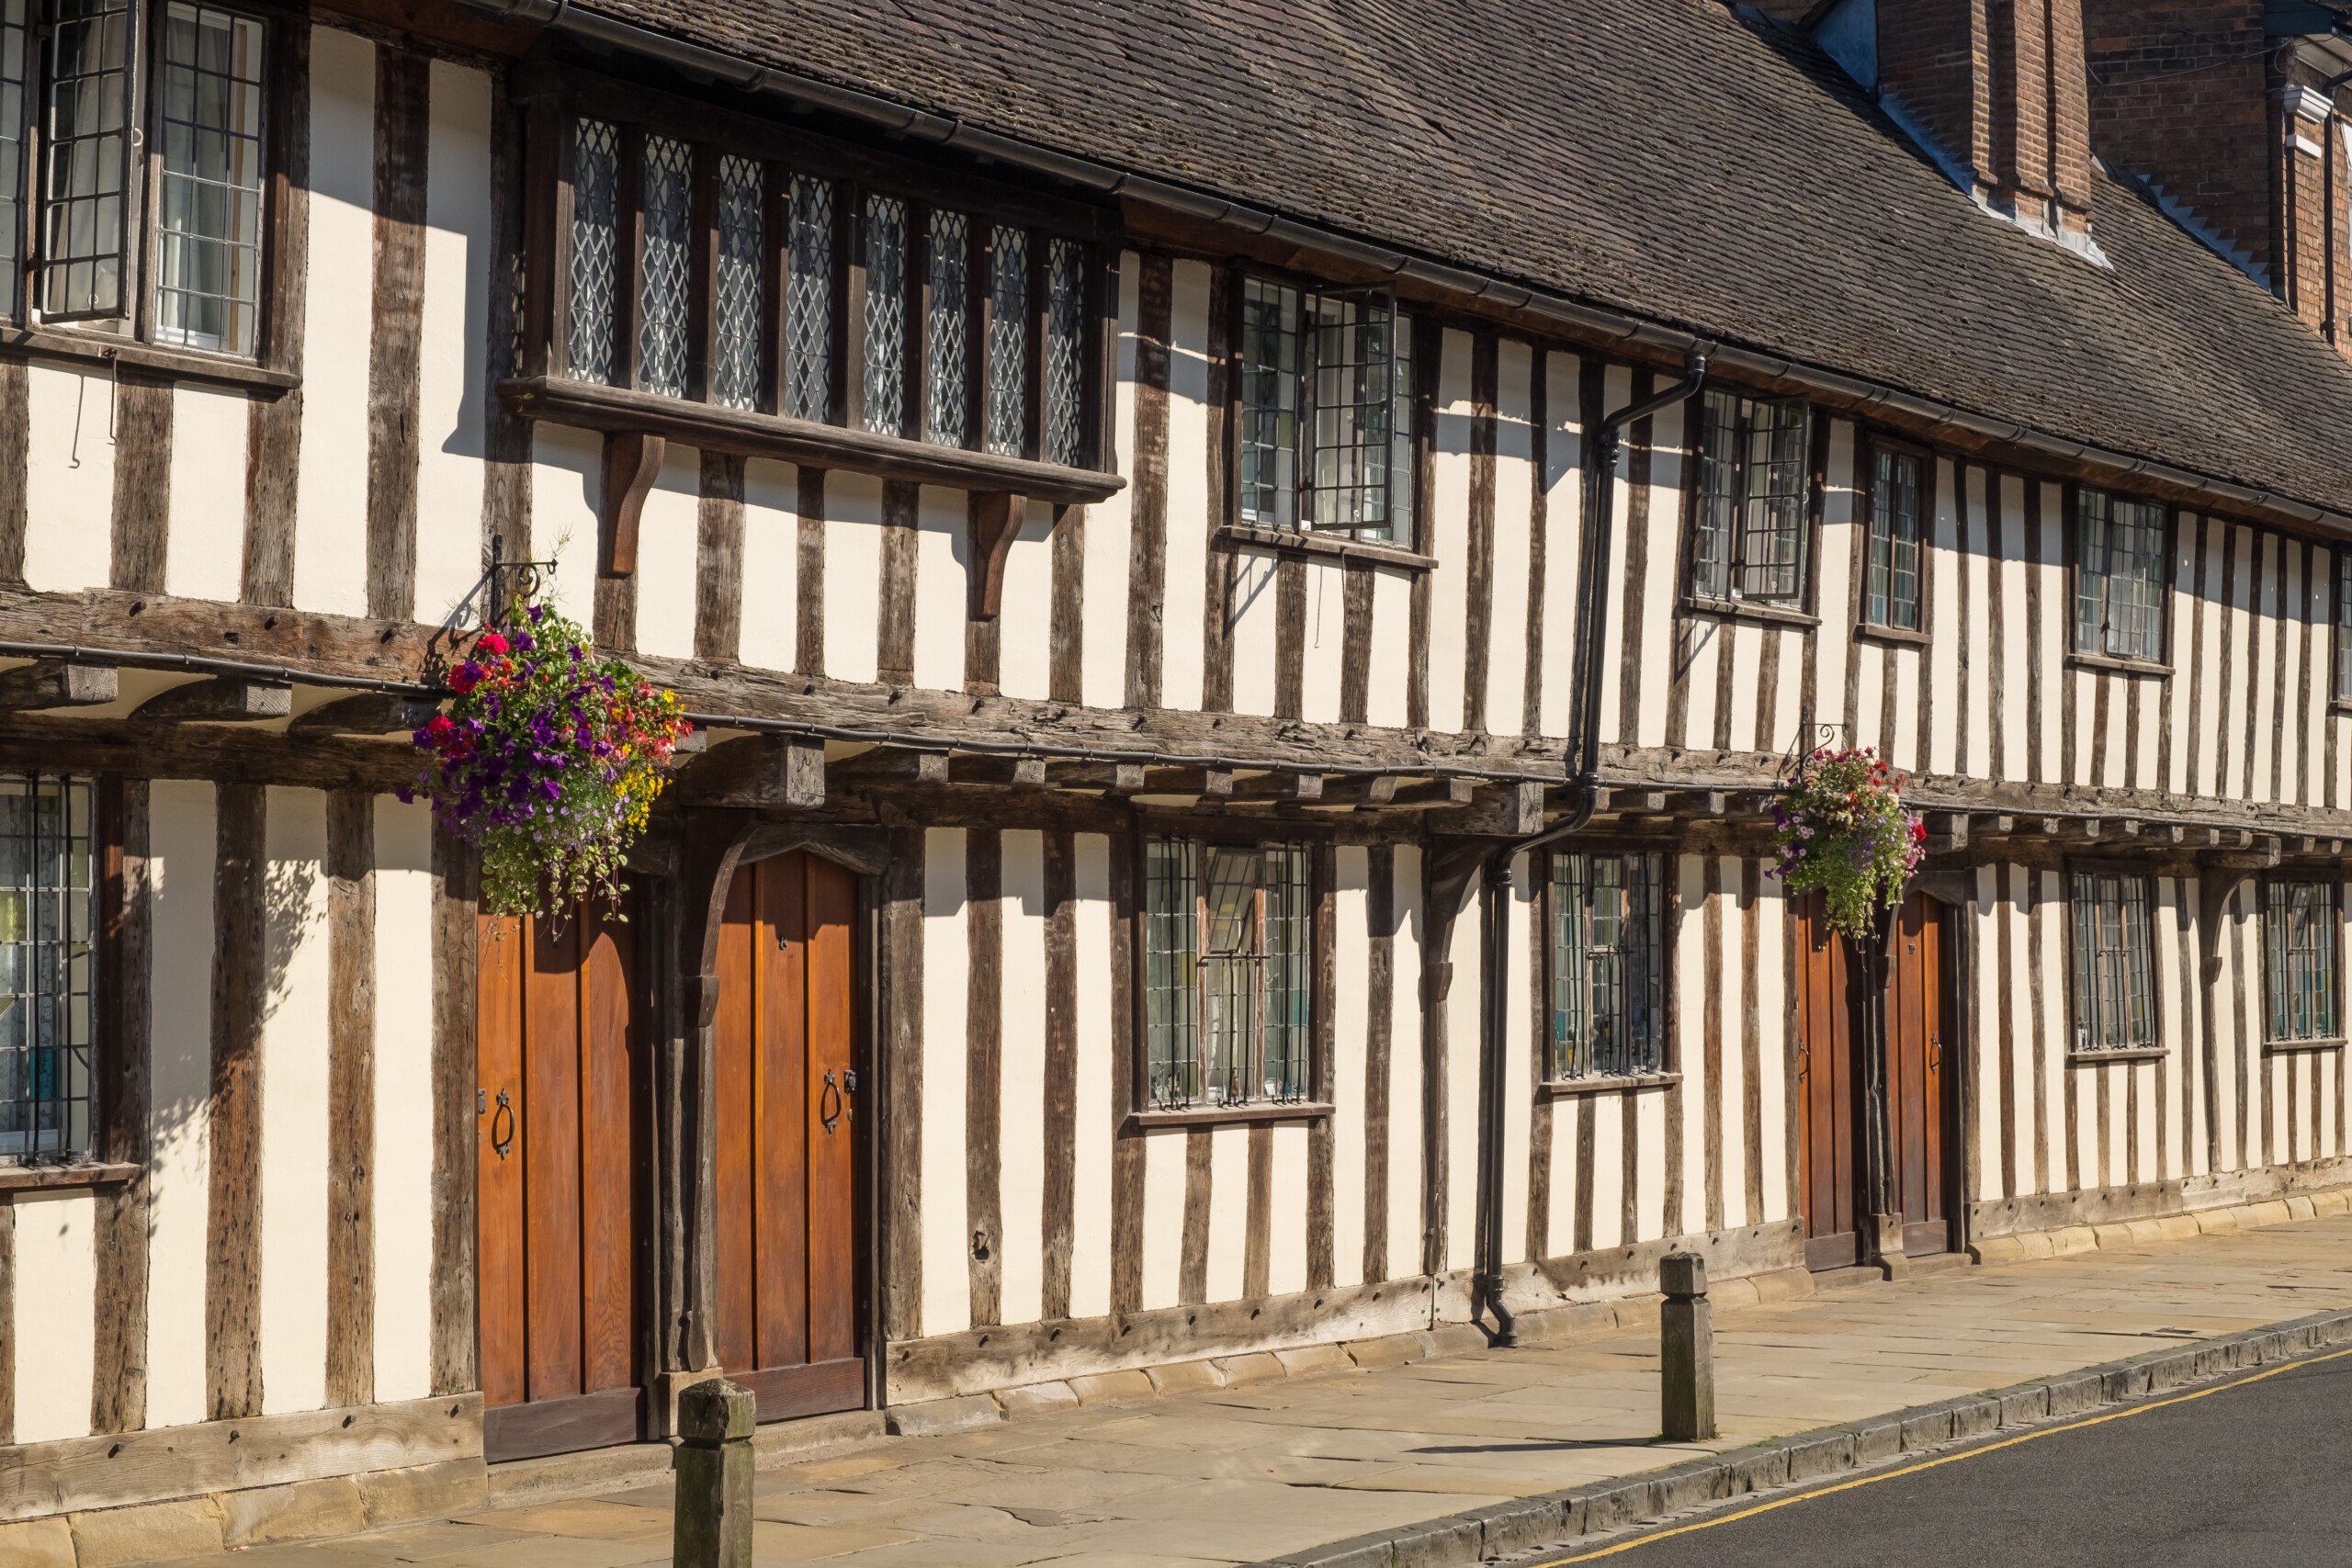 Houses in Stratford-upon-Avon, the birthplace in England of William Shakespeare